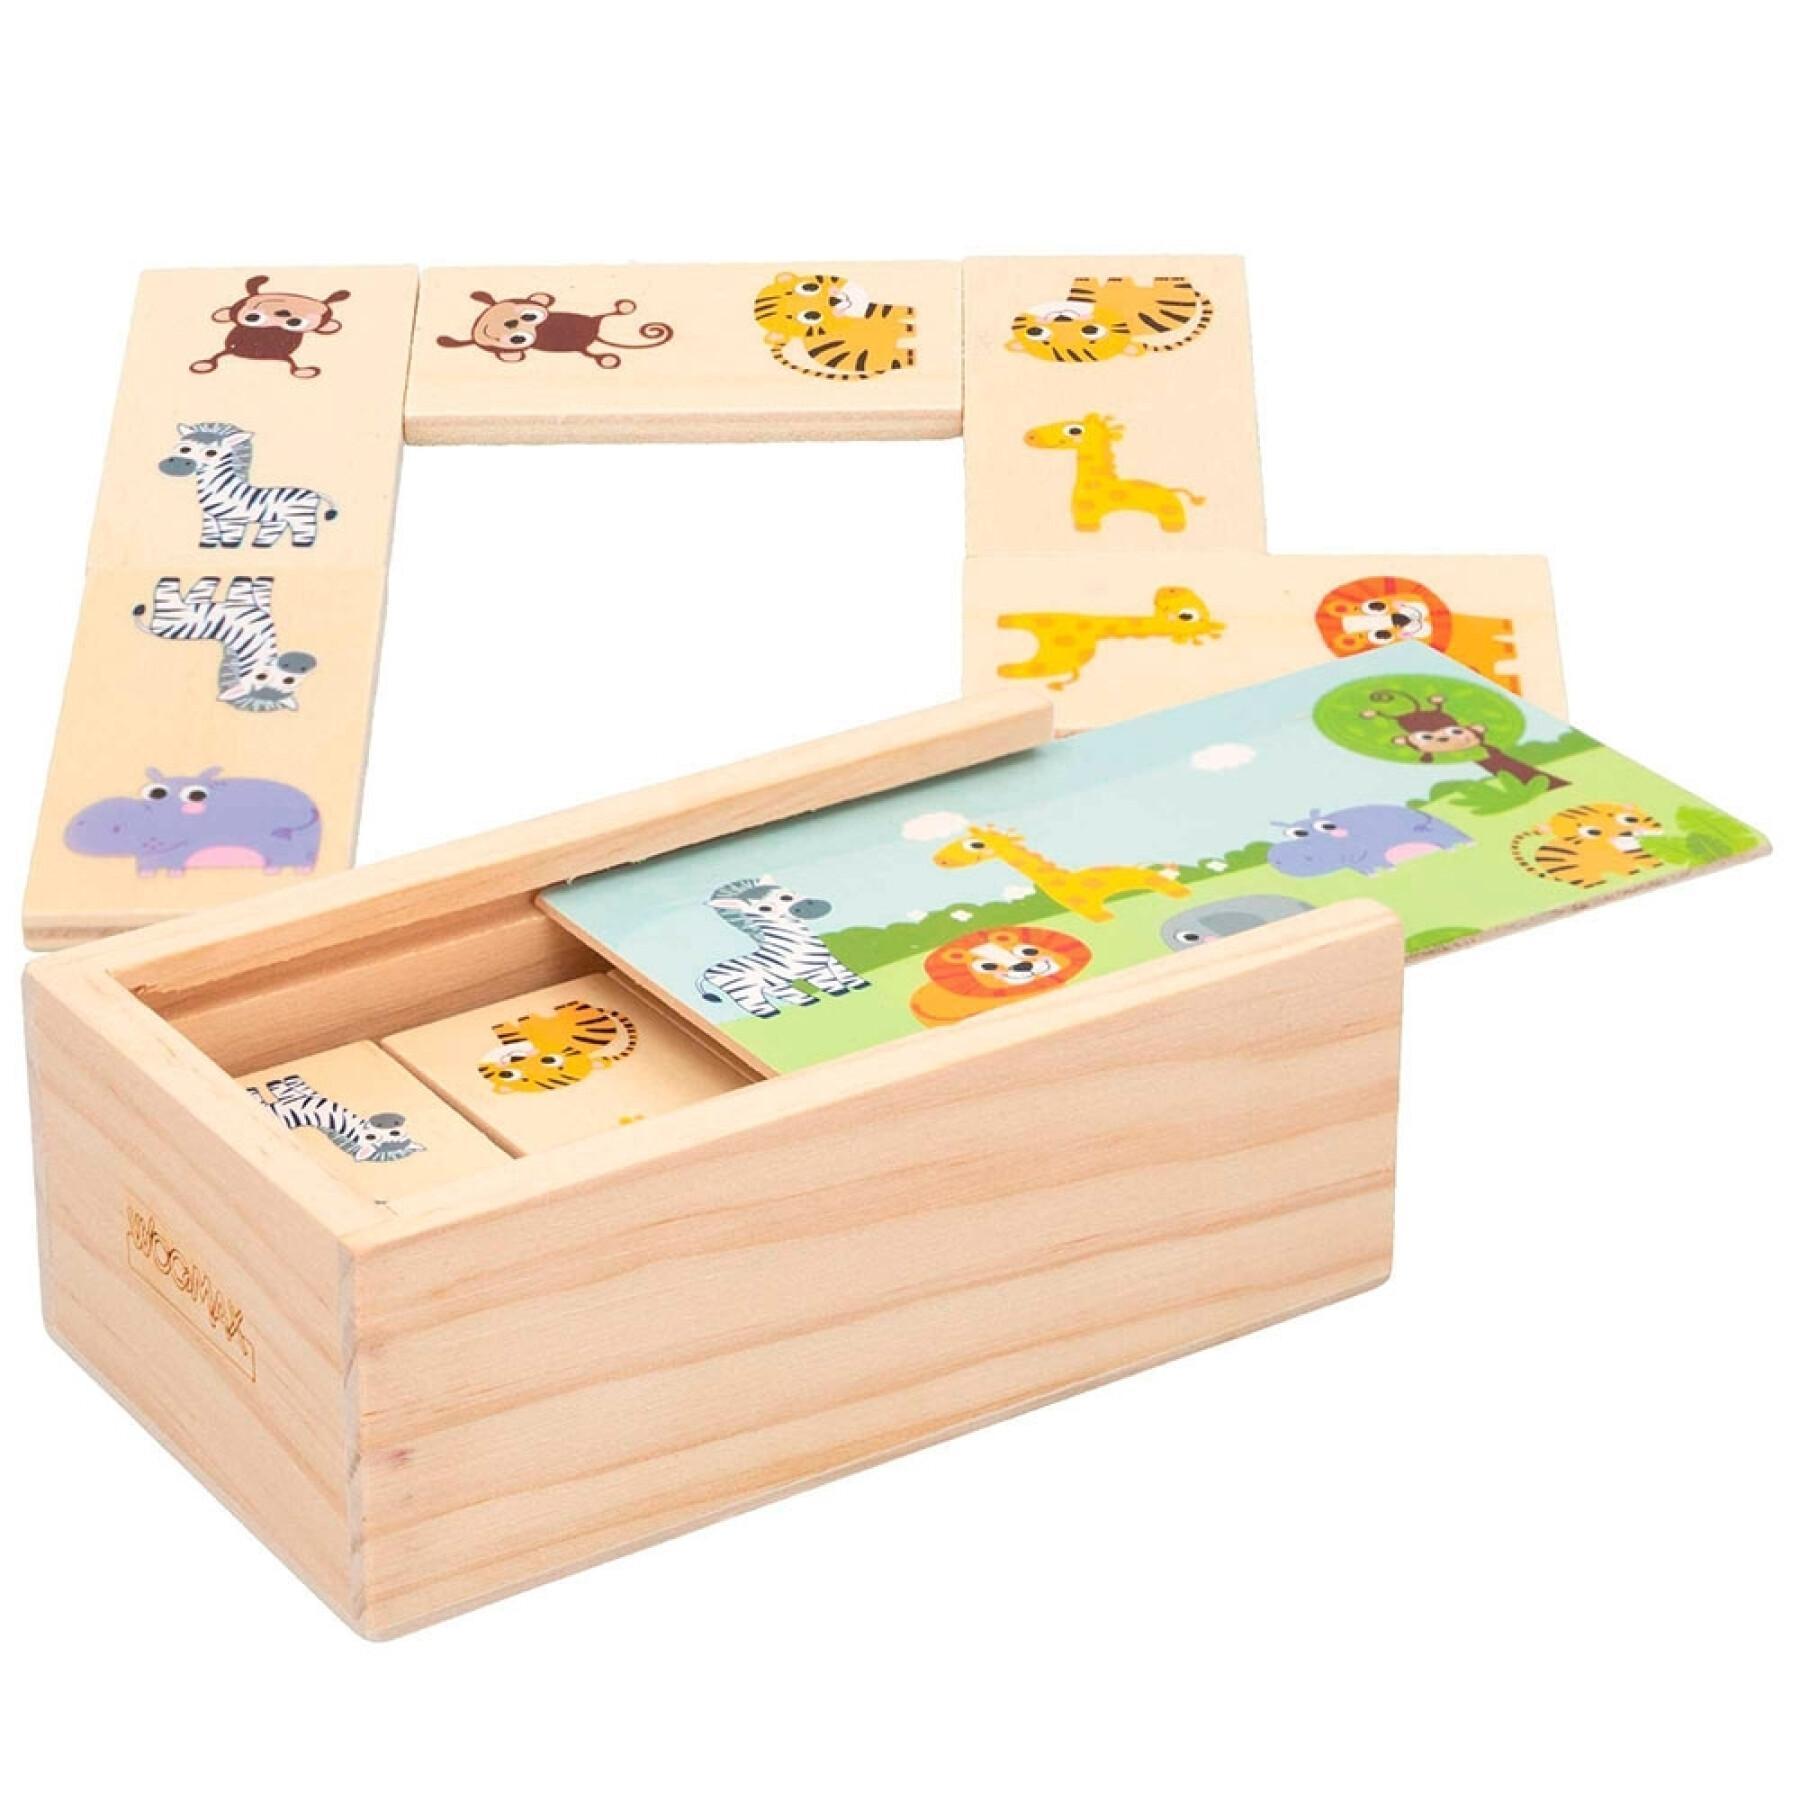 Wooden animal dominoes board game Woomax ECO